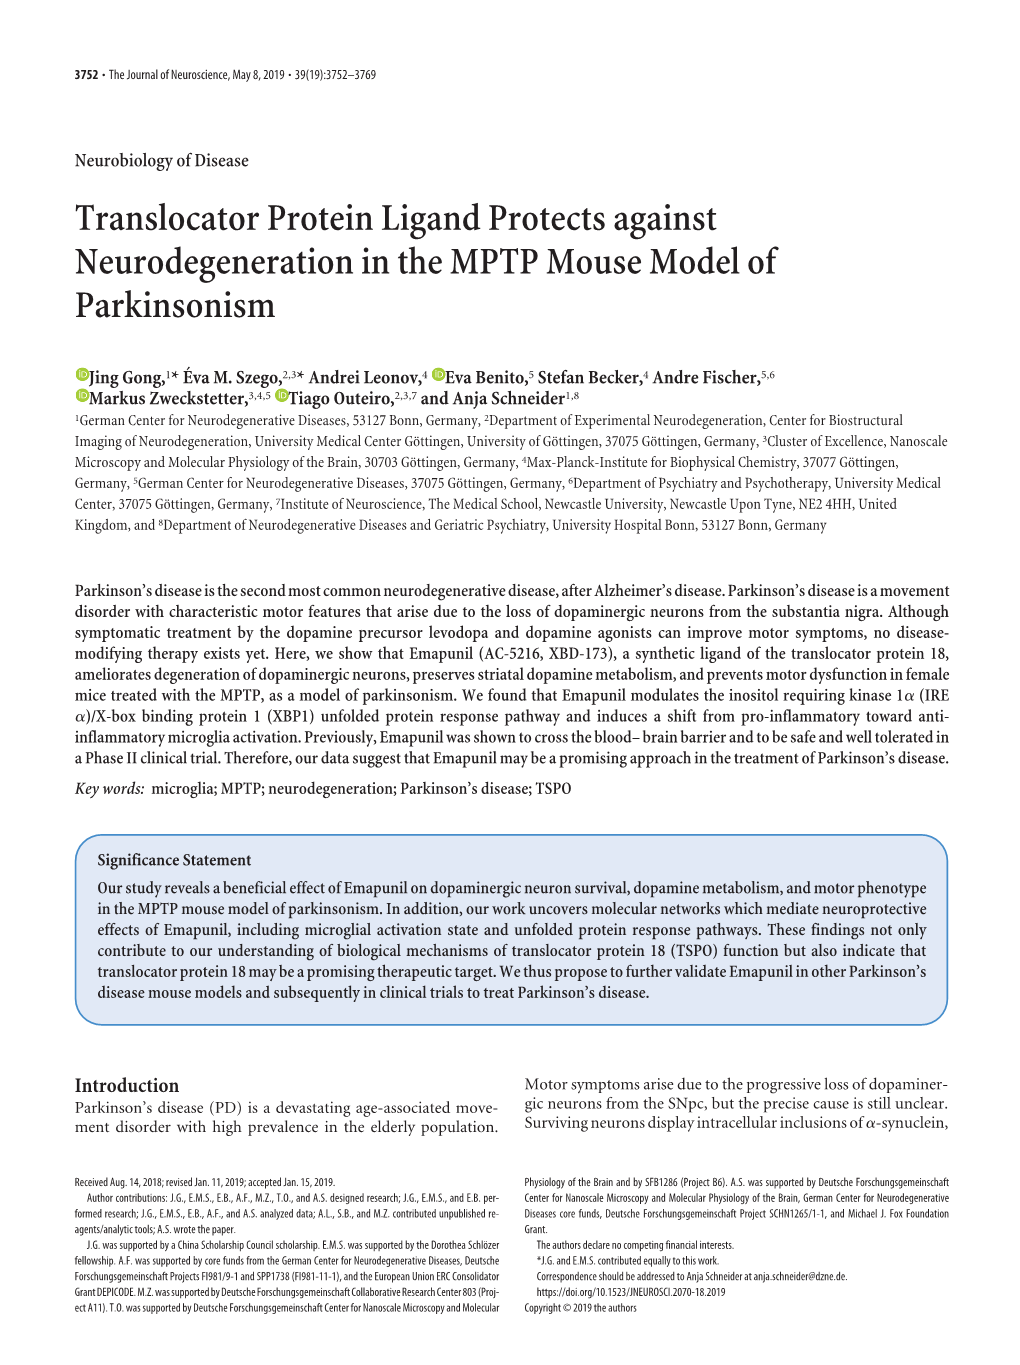 Translocator Protein Ligand Protects Against Neurodegeneration in the MPTP Mouse Model of Parkinsonism